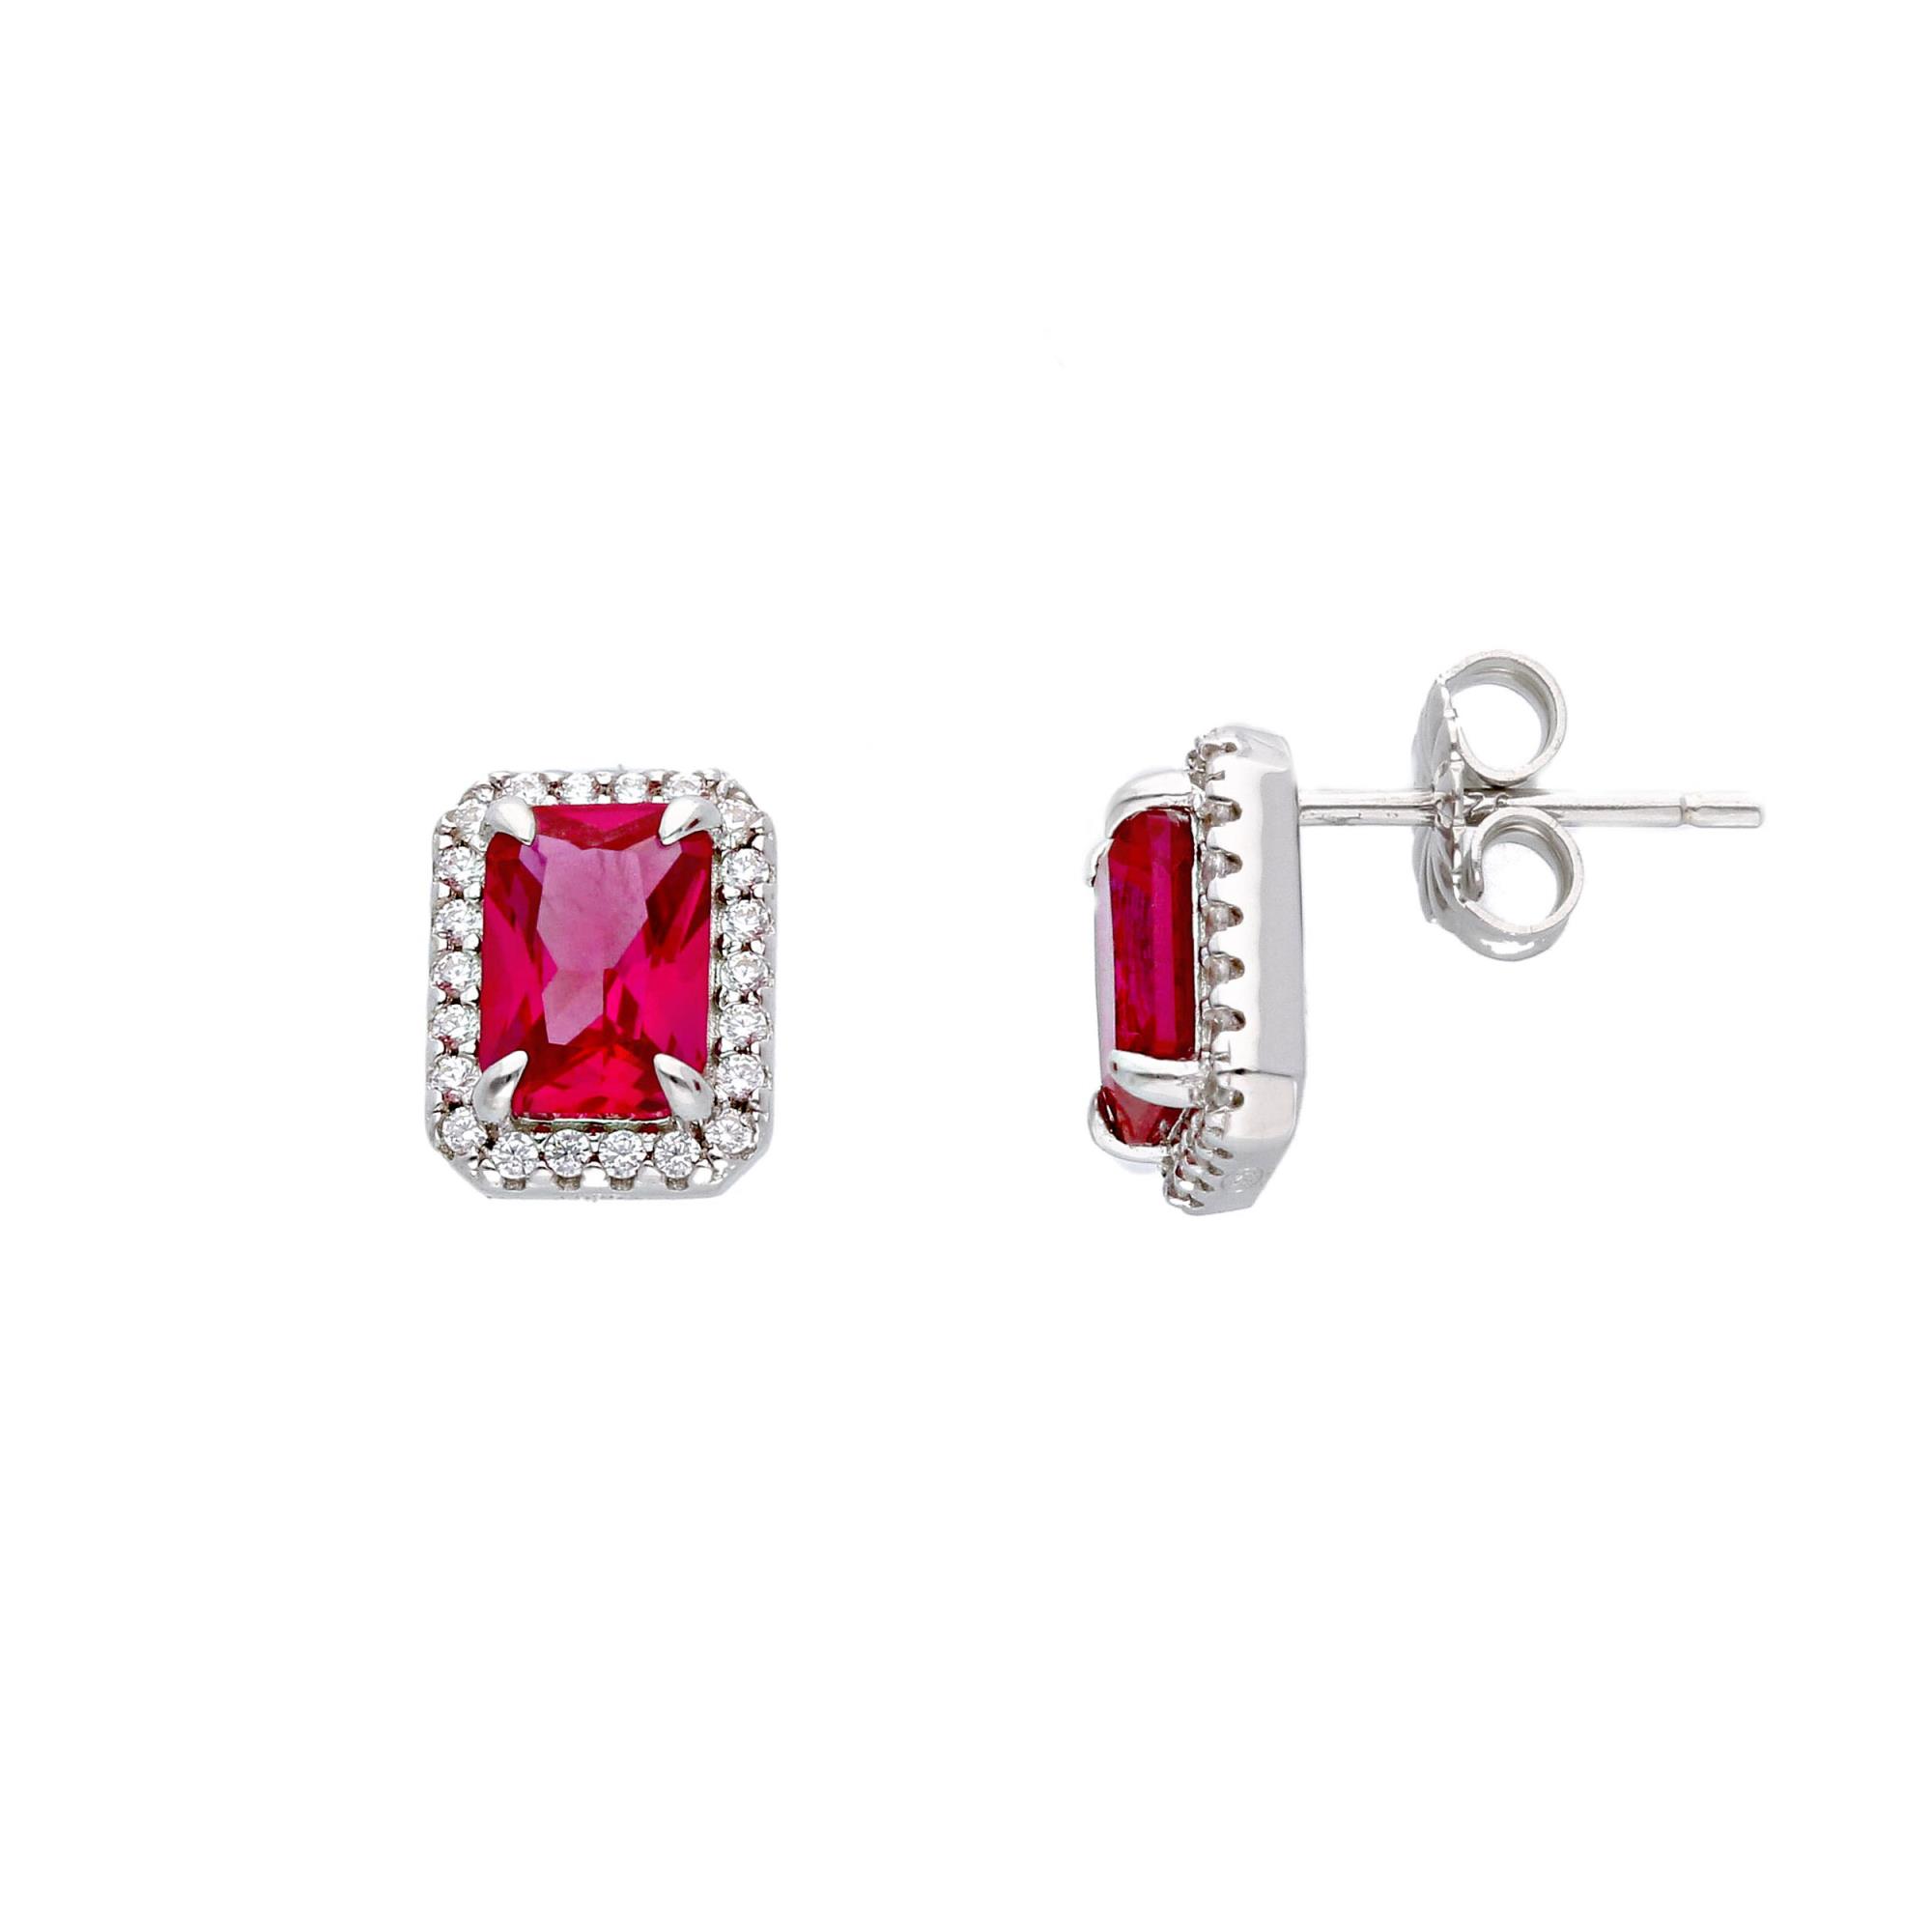 Princess earrings in silver with red stone and zircons - ORO&CO 925